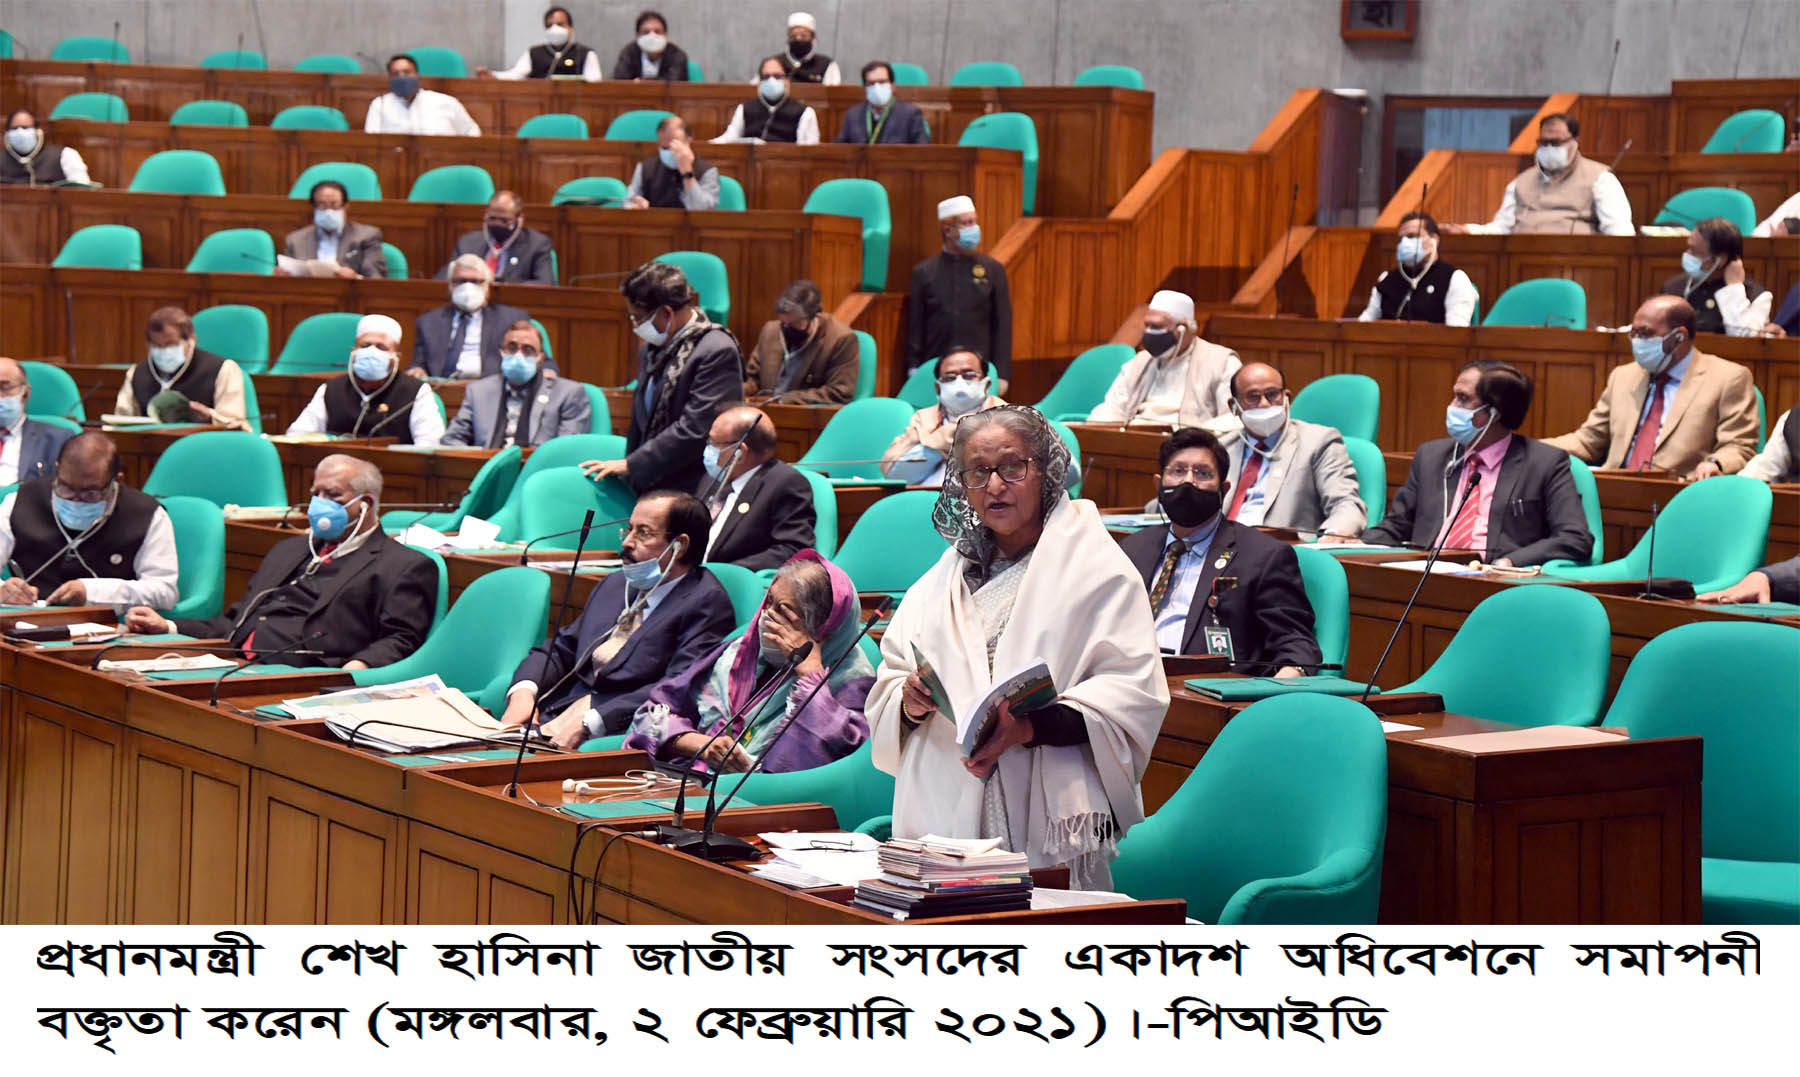 Sheikh Hasina attends Parliament session